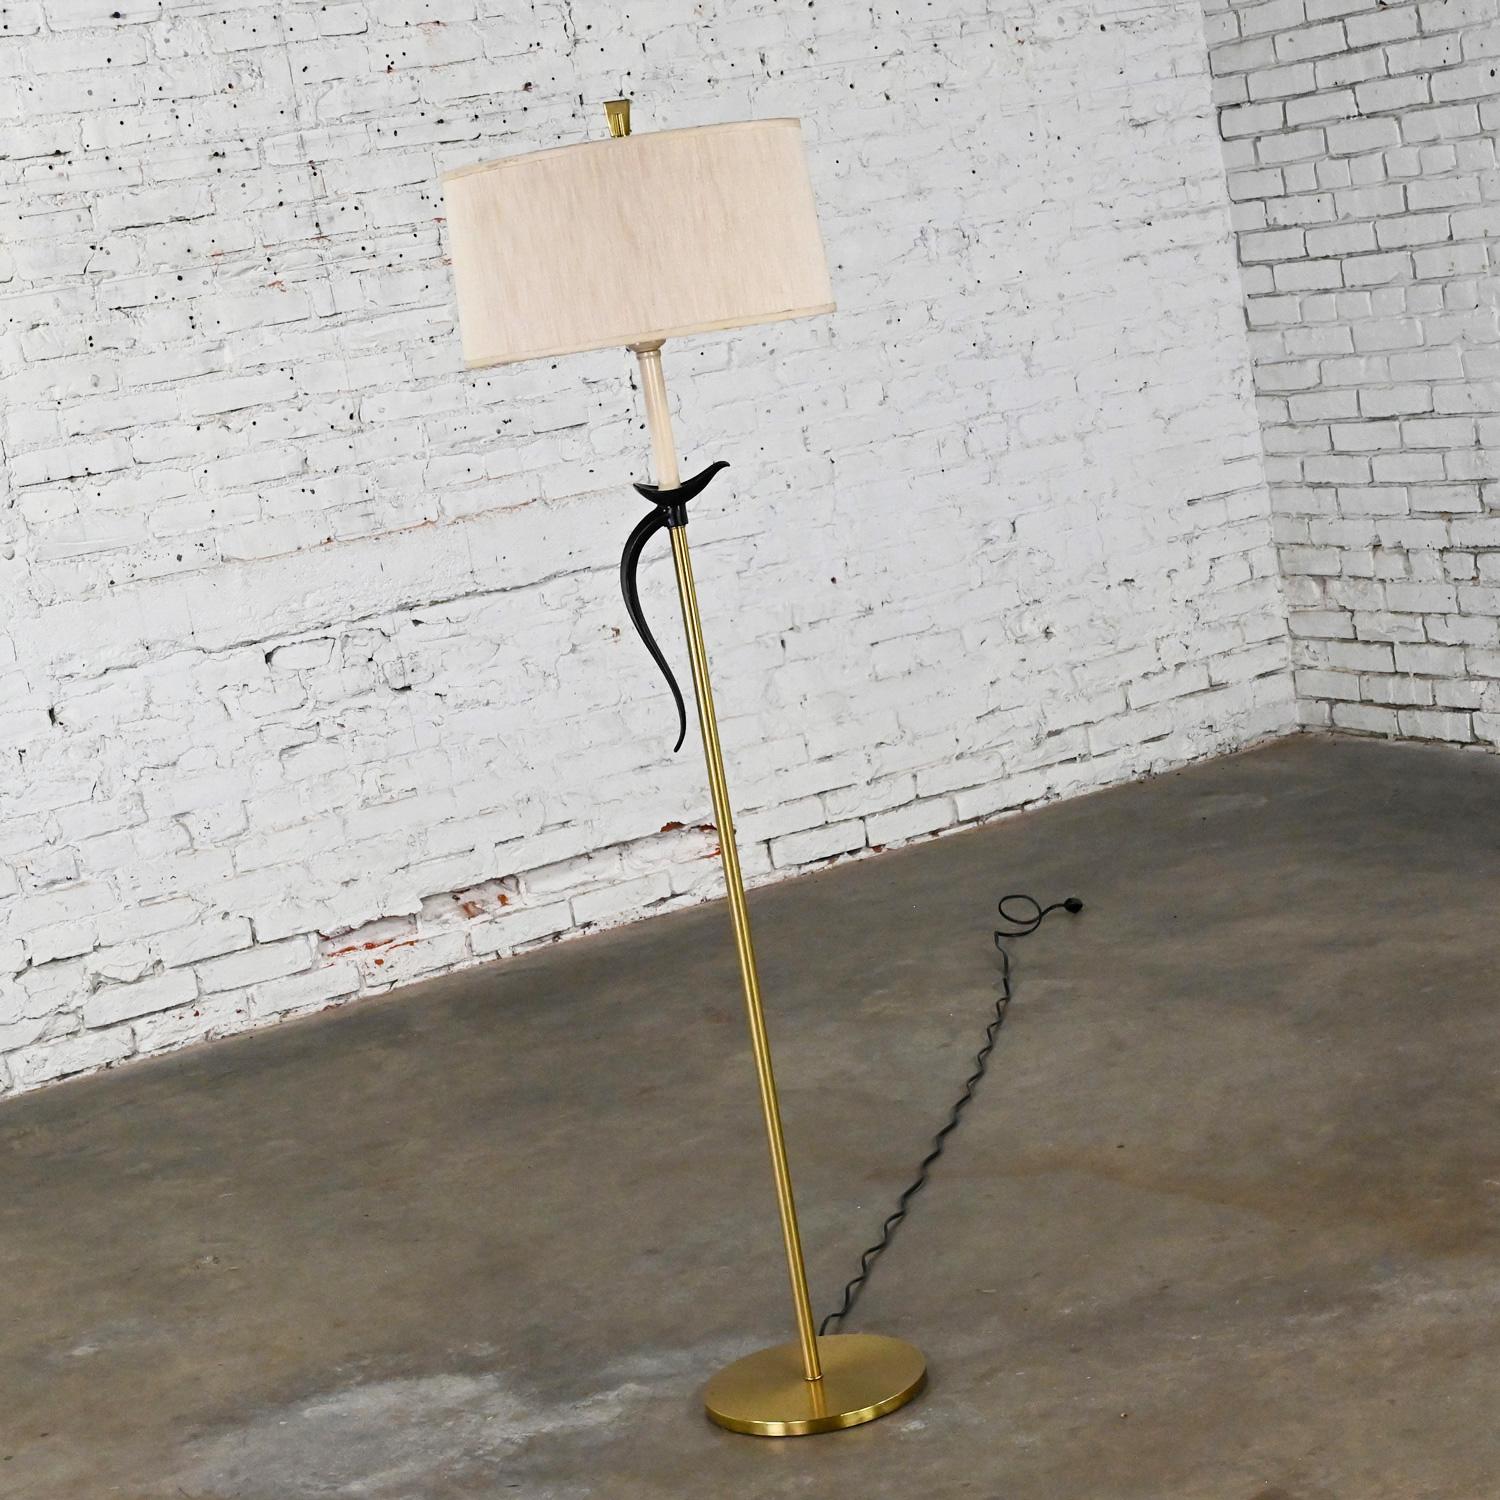 Gorgeous vintage MCM (Mid-Century Modern,) or Hollywood Regency style floor lamp with a brass plated base and shaft, and black stylized Pheasant Tail candle holder along with its original beige silk fabric drum shade. Beautiful condition, keeping in